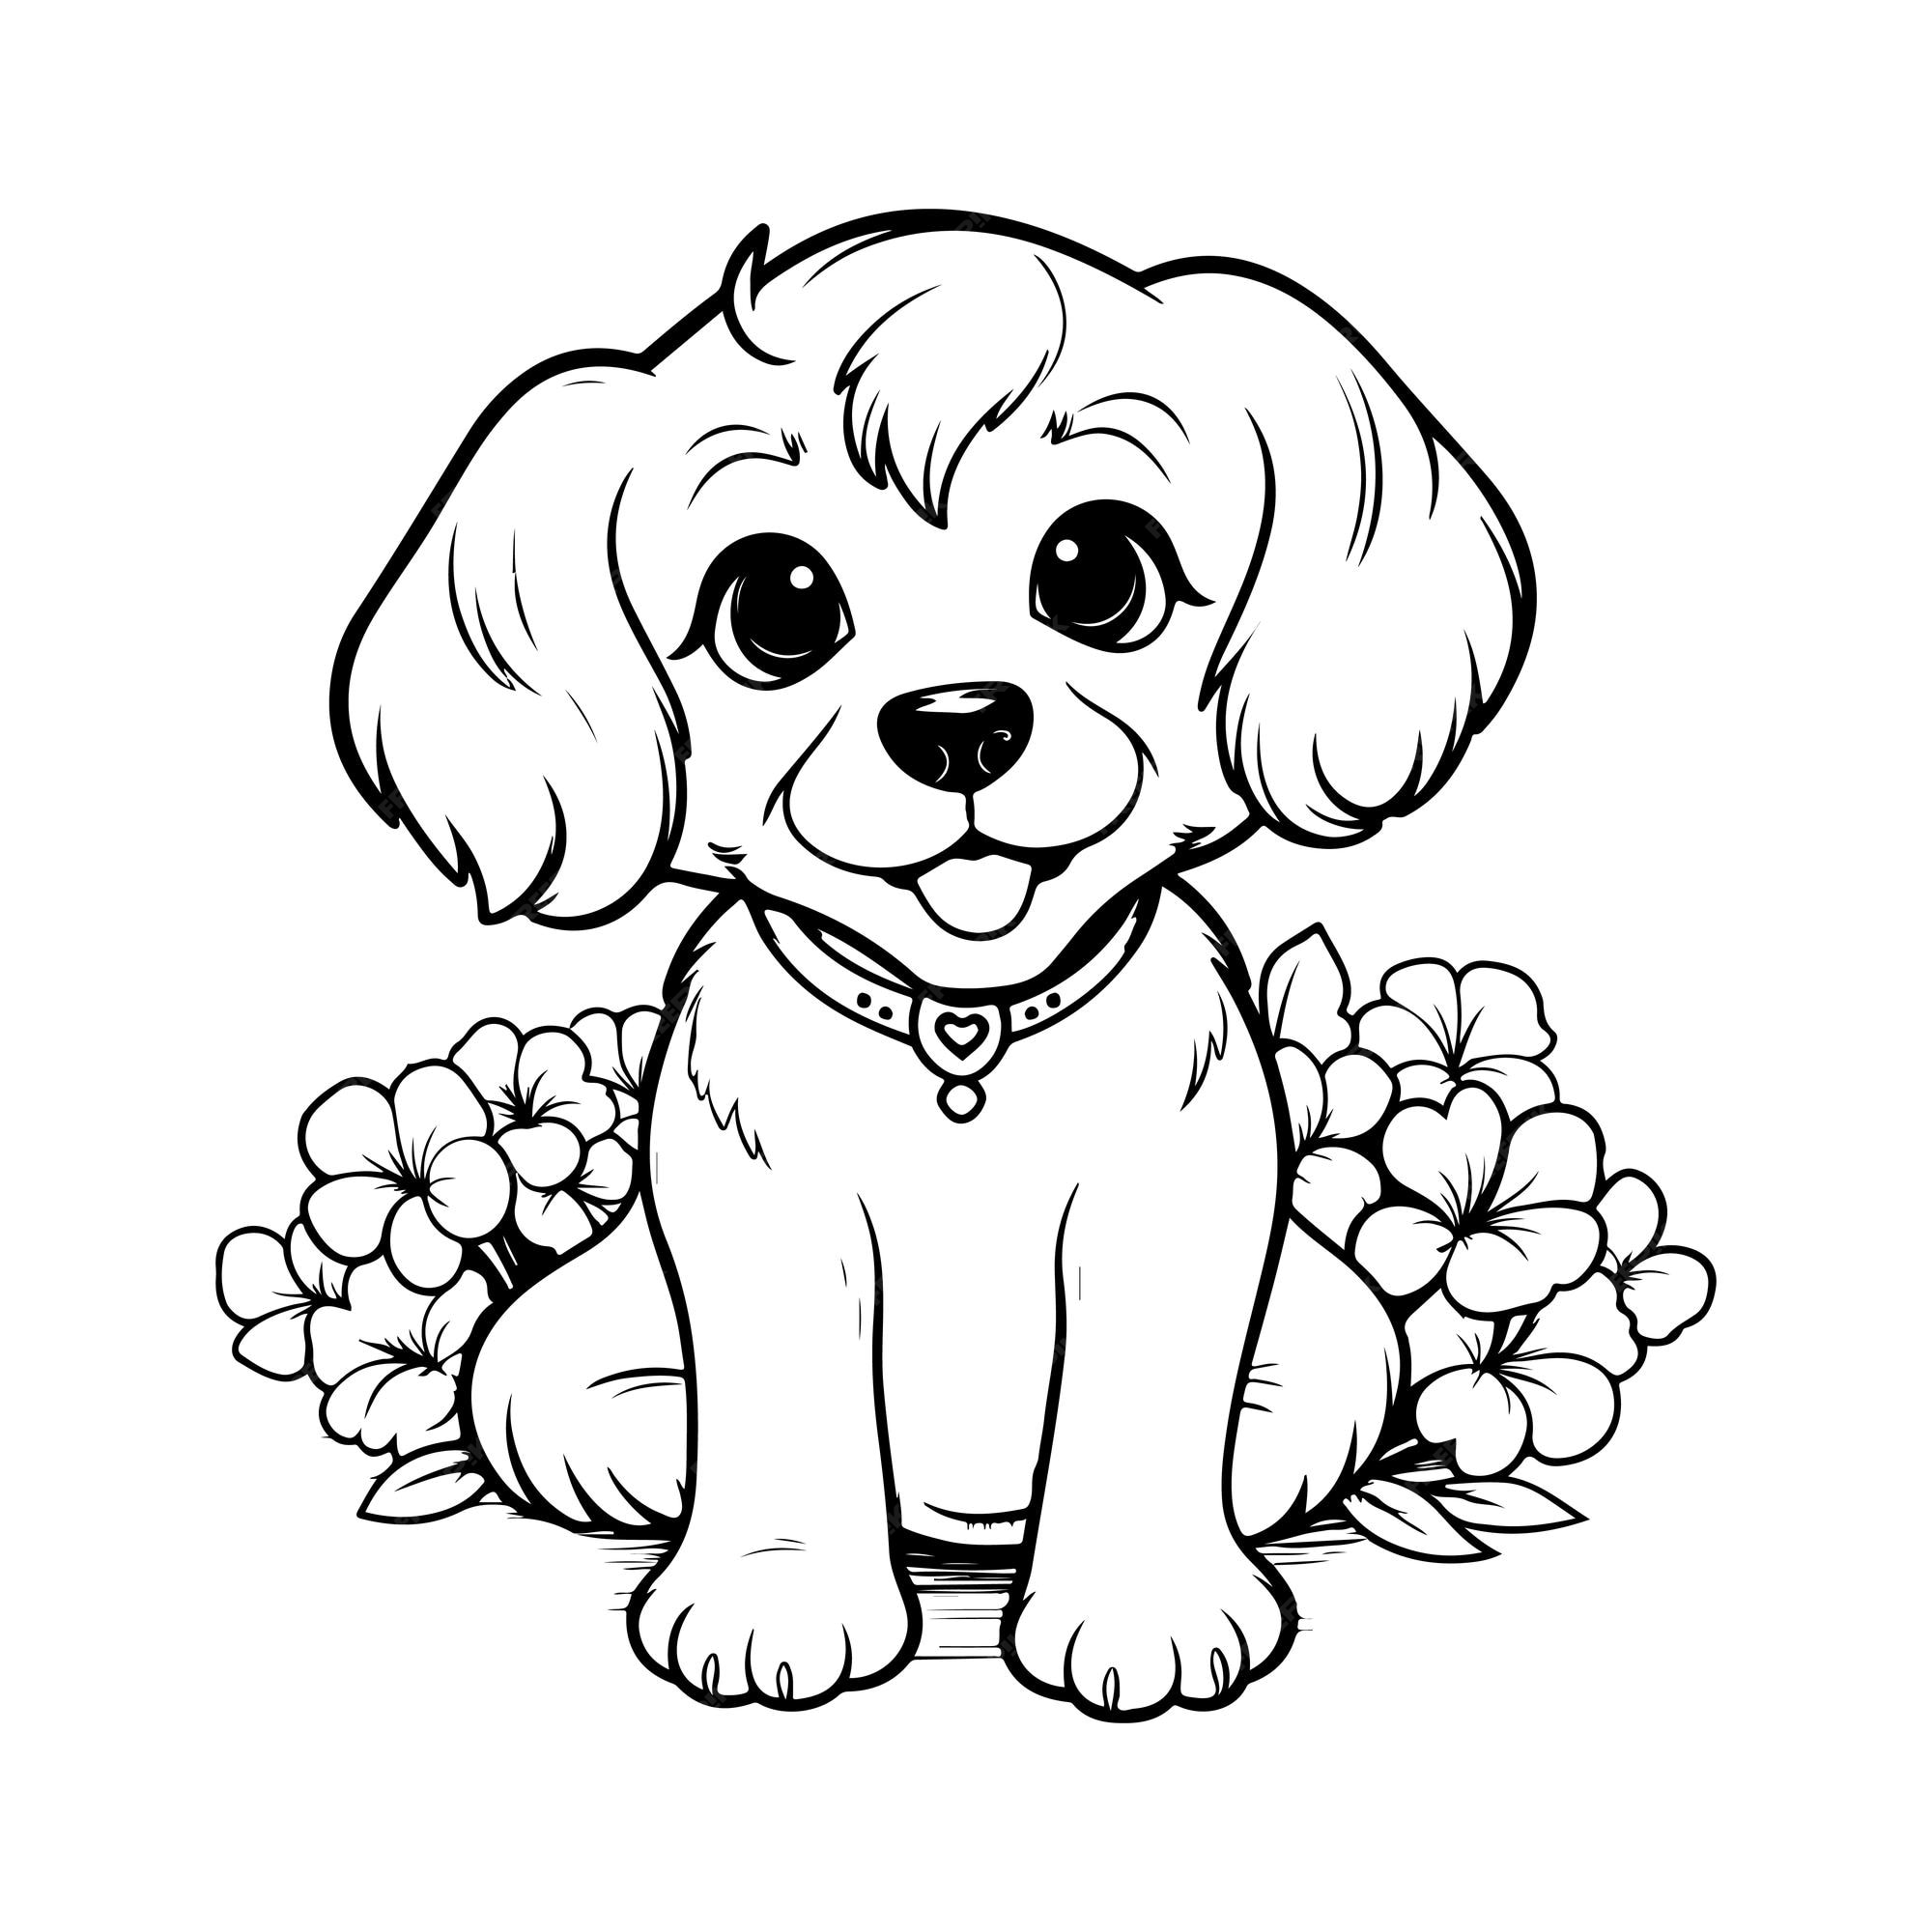 Premium vector vector illustration dog character coloring book page with dogs coloring page outline of cute puppy